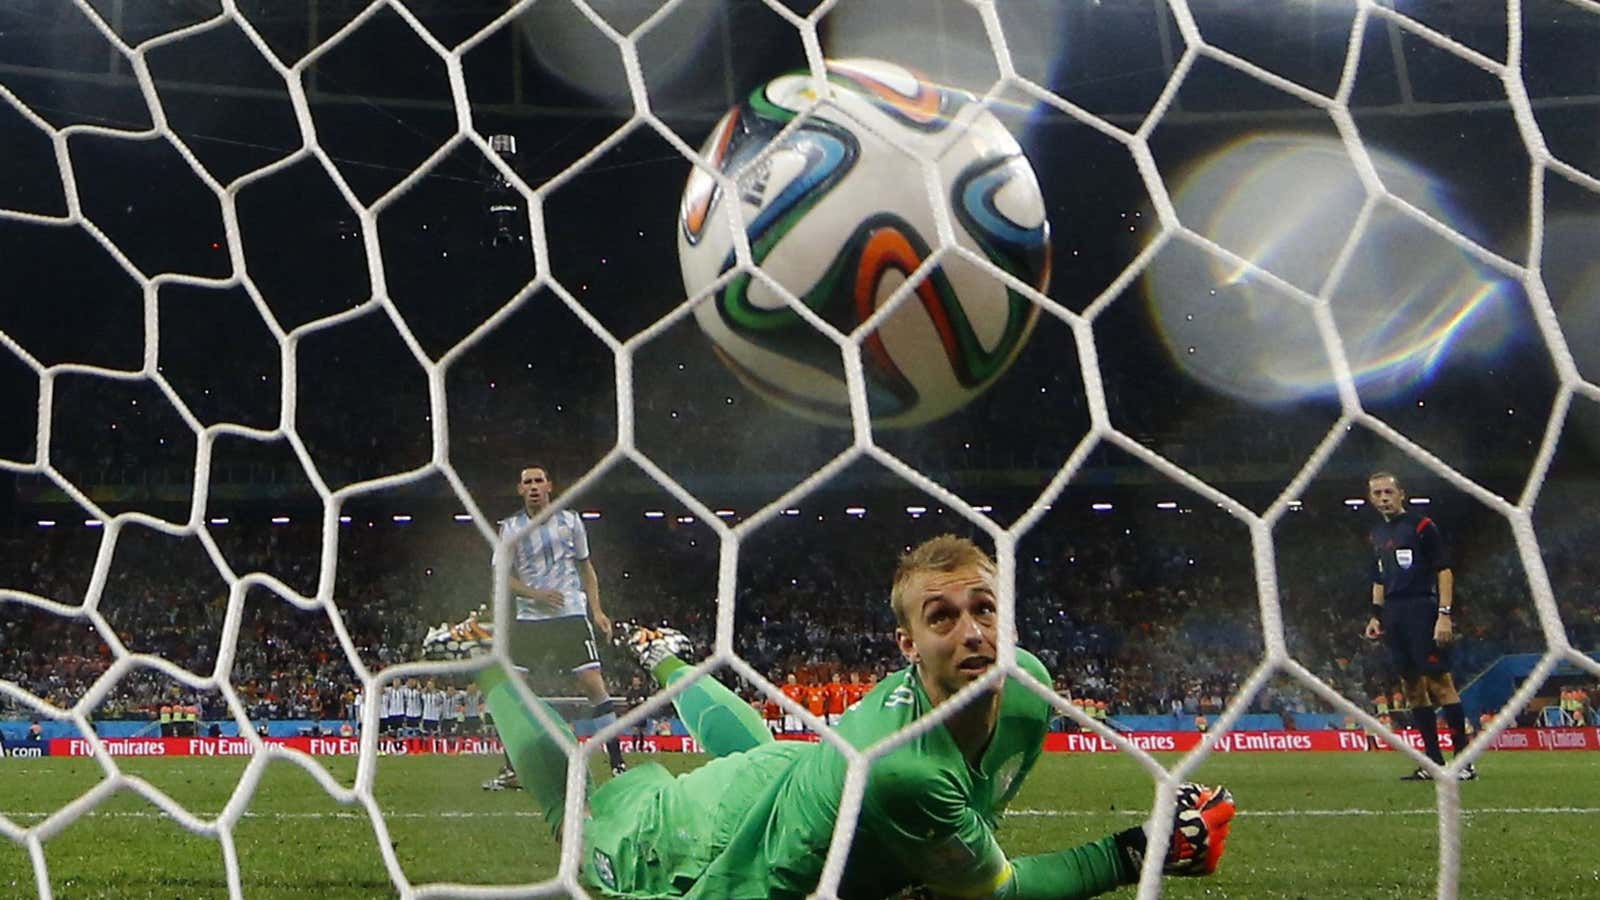 Lot of goals have been scored using Adidas equipment at this World Cup.